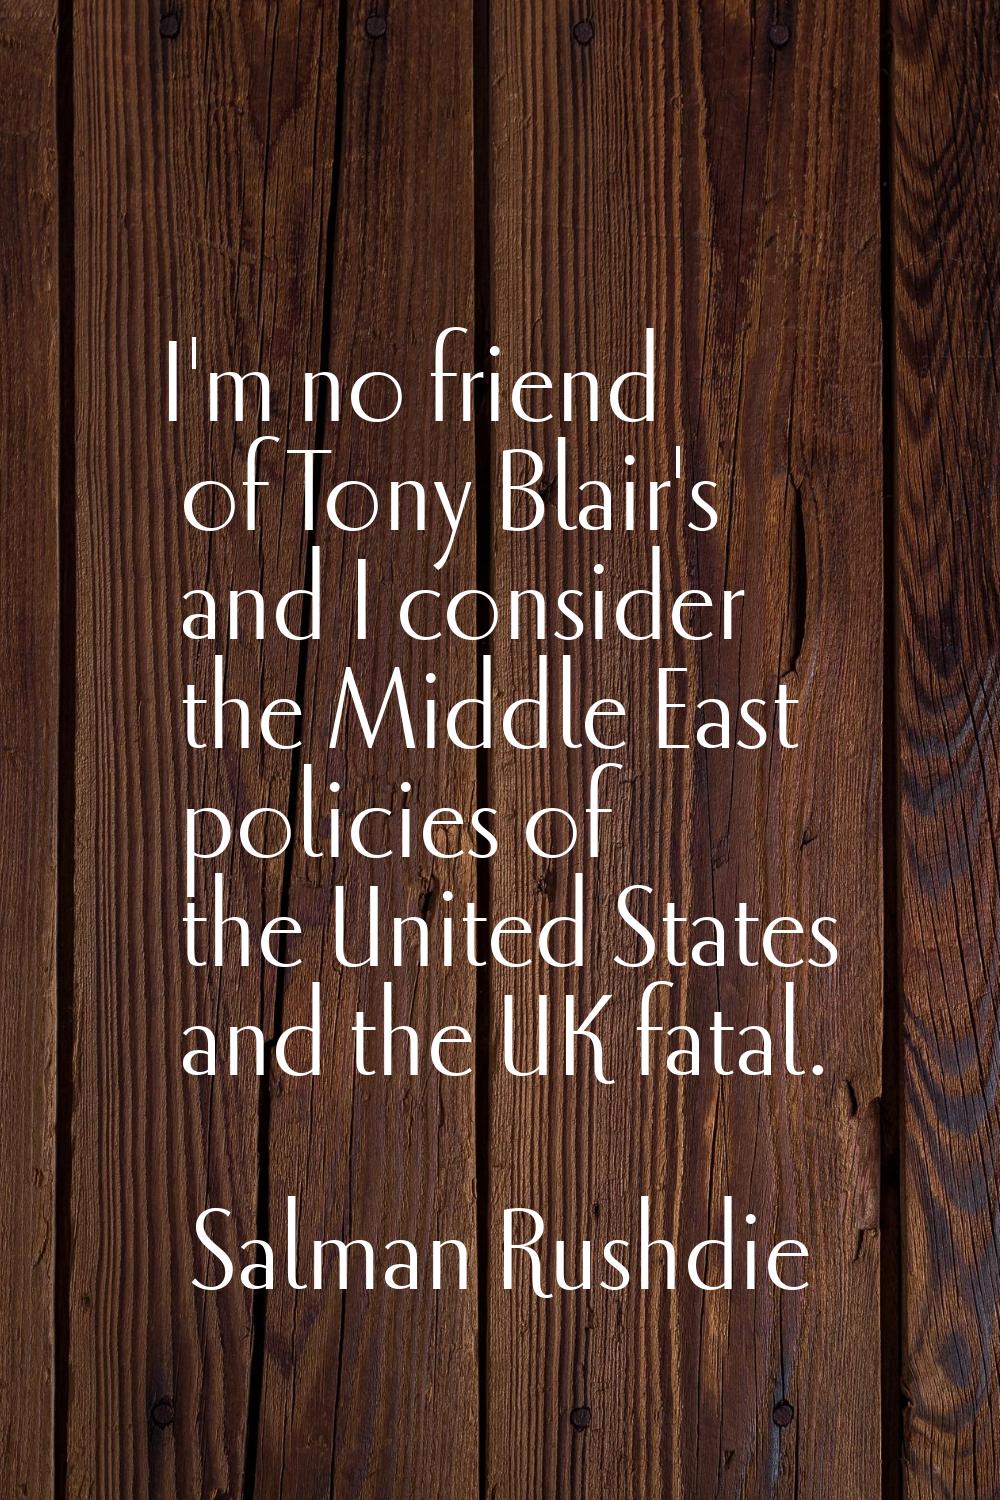 I'm no friend of Tony Blair's and I consider the Middle East policies of the United States and the 